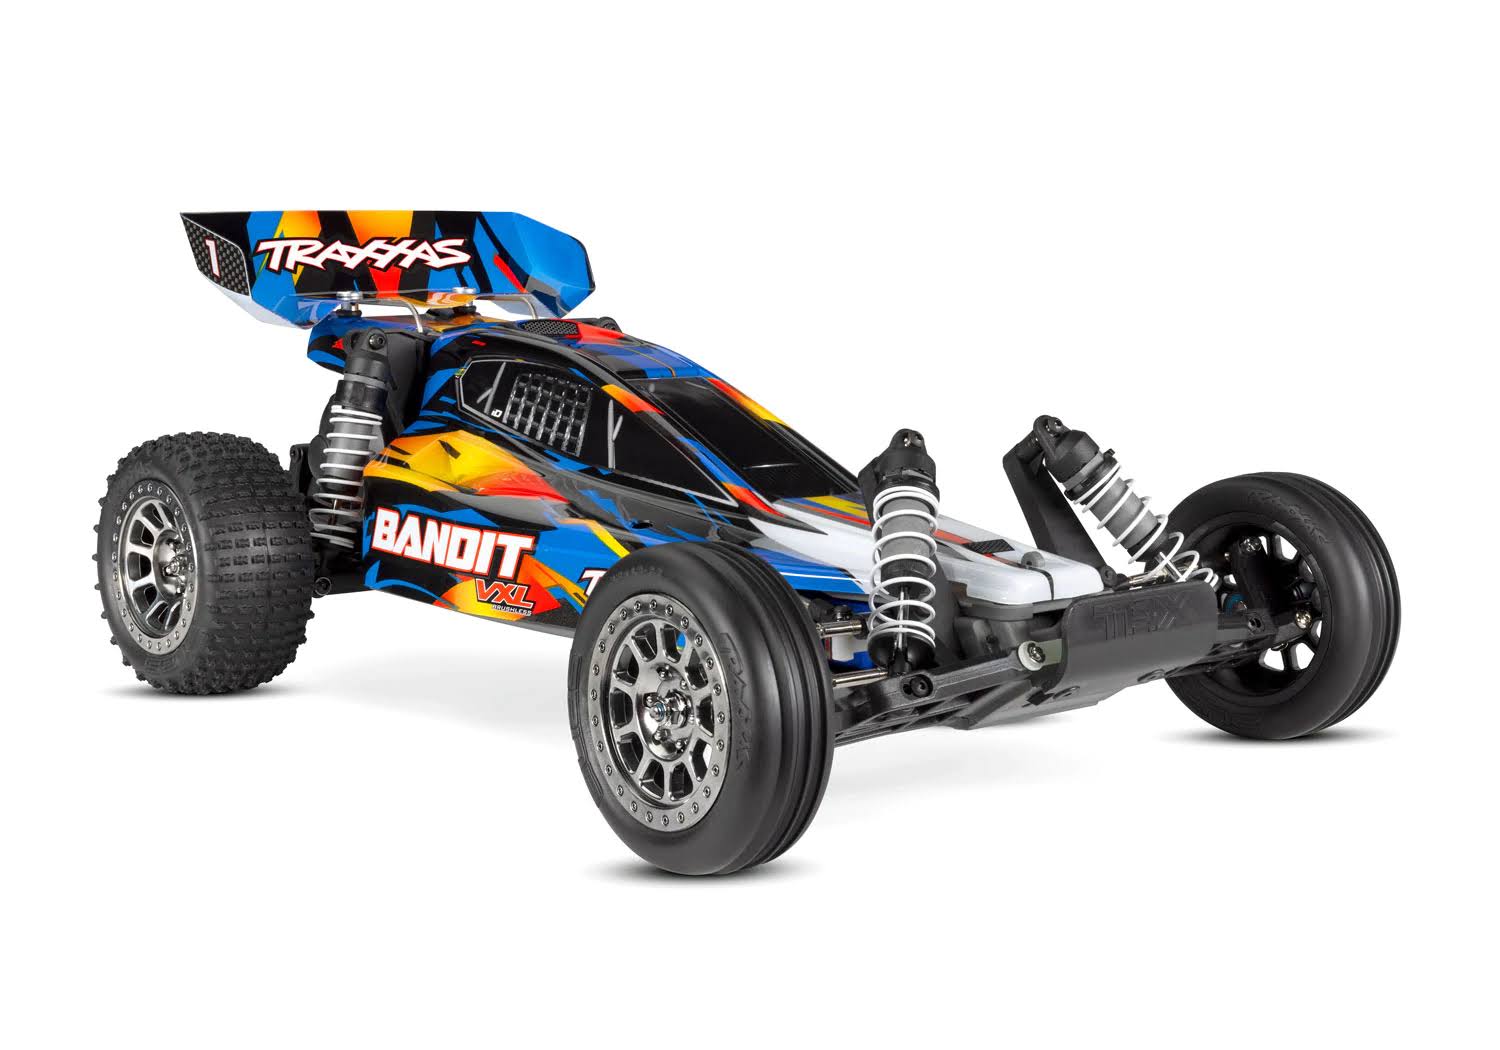 Traxxas Bandit 1/10 VXL 2WD Brushless RC Buggy Purple 24076-74